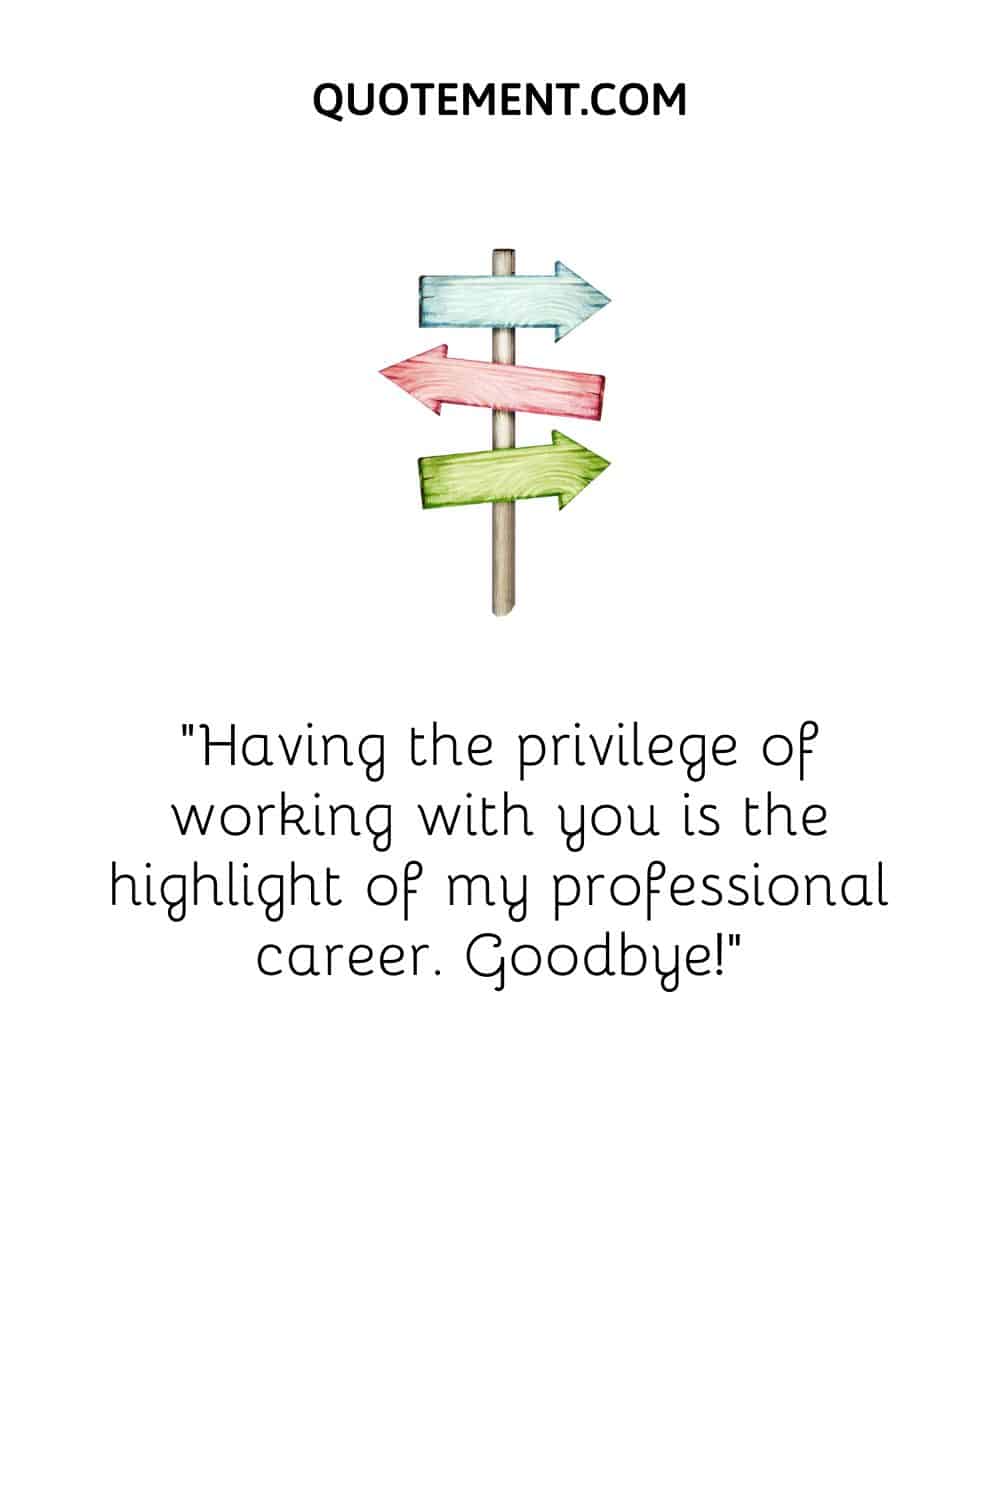 Having the privilege of working with you is the highlight of my professional career. Goodbye!